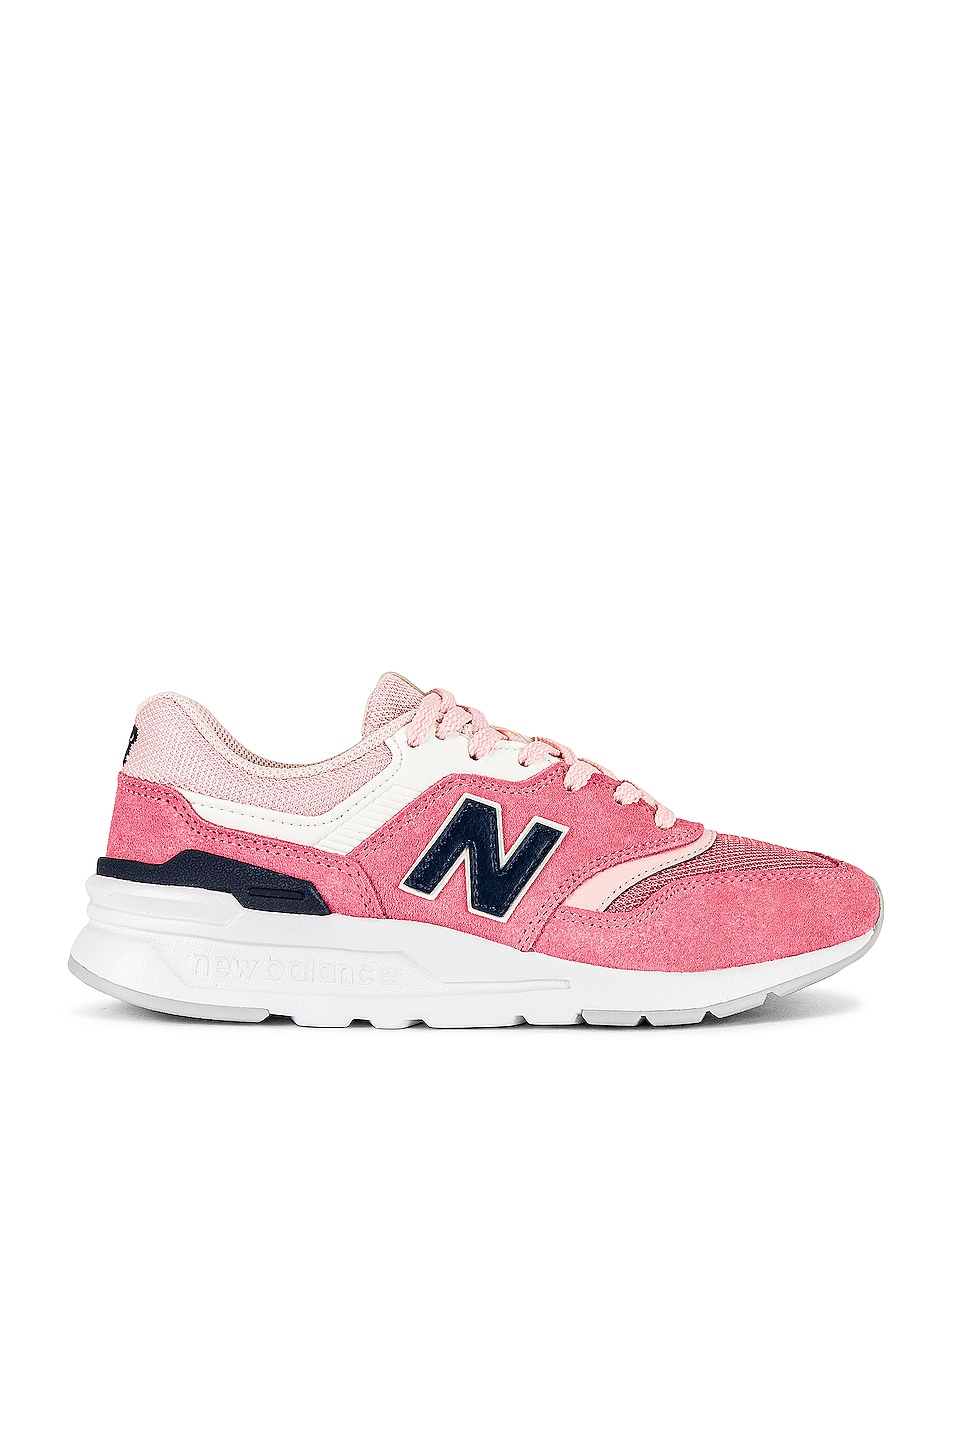 Image 1 of New Balance 997H Sneakers in Pink Haze & White